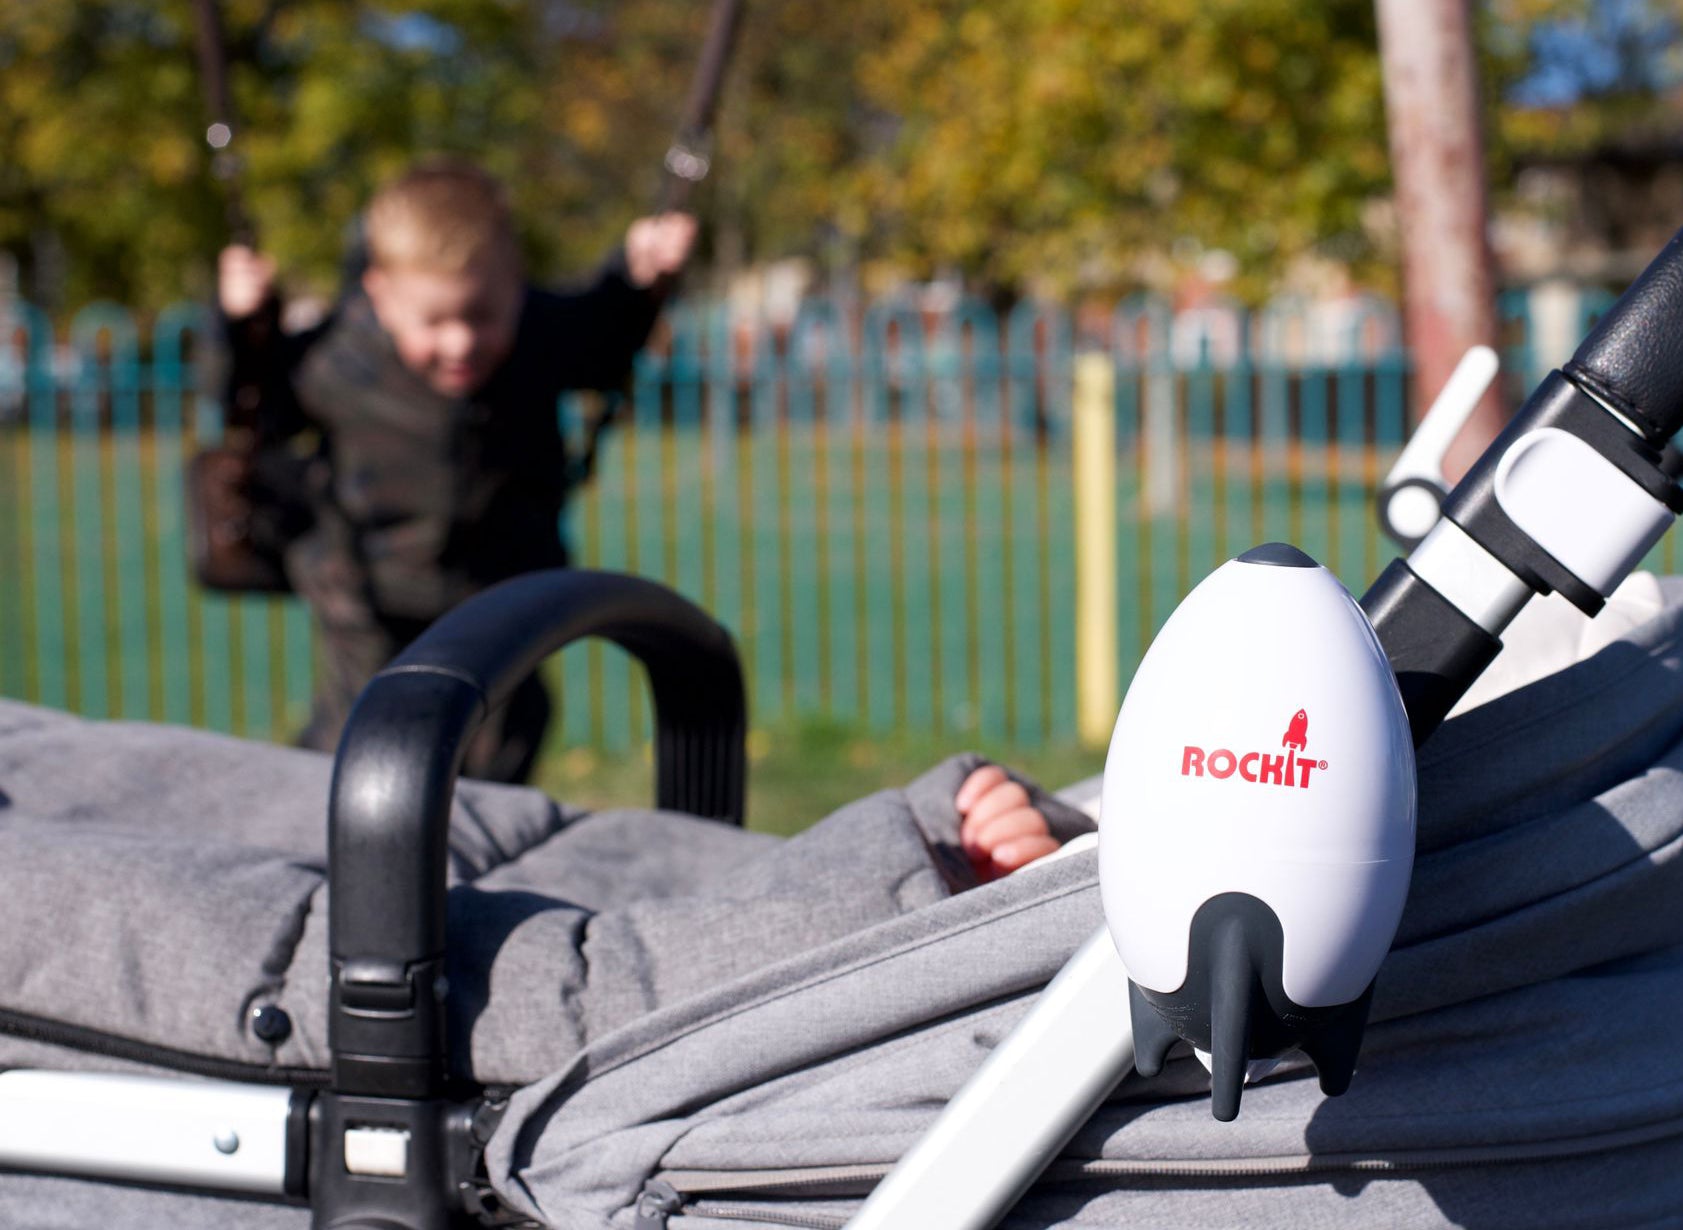 How to set up and use the Rockit Rechargeable Baby Rocker for